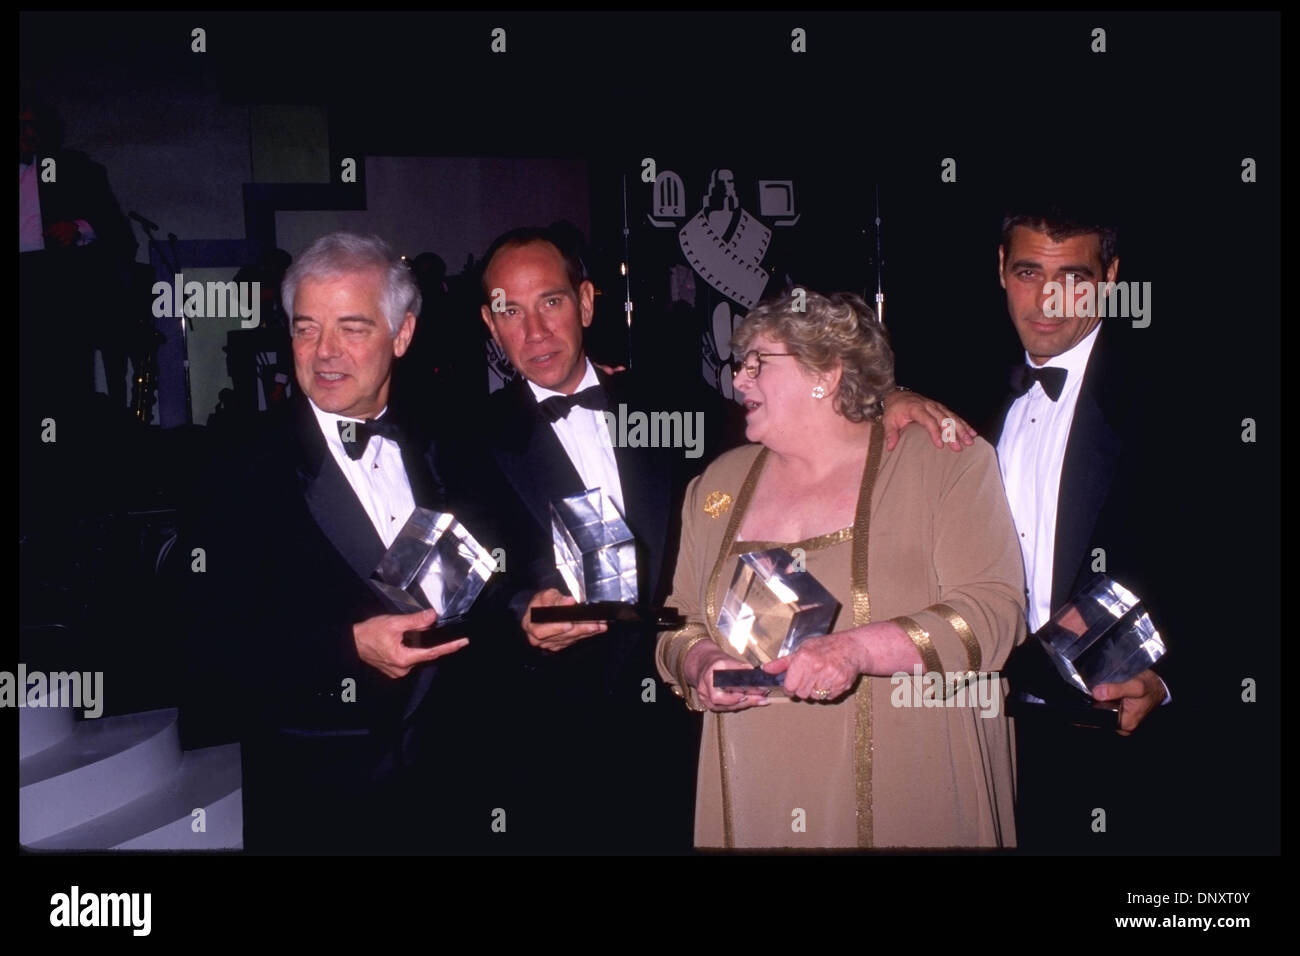 October 5, 1996; NICK,GEORGE CLOONEY, ROSEMARY CLOONEY and MIGUEL FERRER attend the opening night of Museum Hollywood on October 5, 1996. Mandatory Credit: Kathy Hutchins/ZUMA Press. (©) Kathy Hutchins Stock Photo